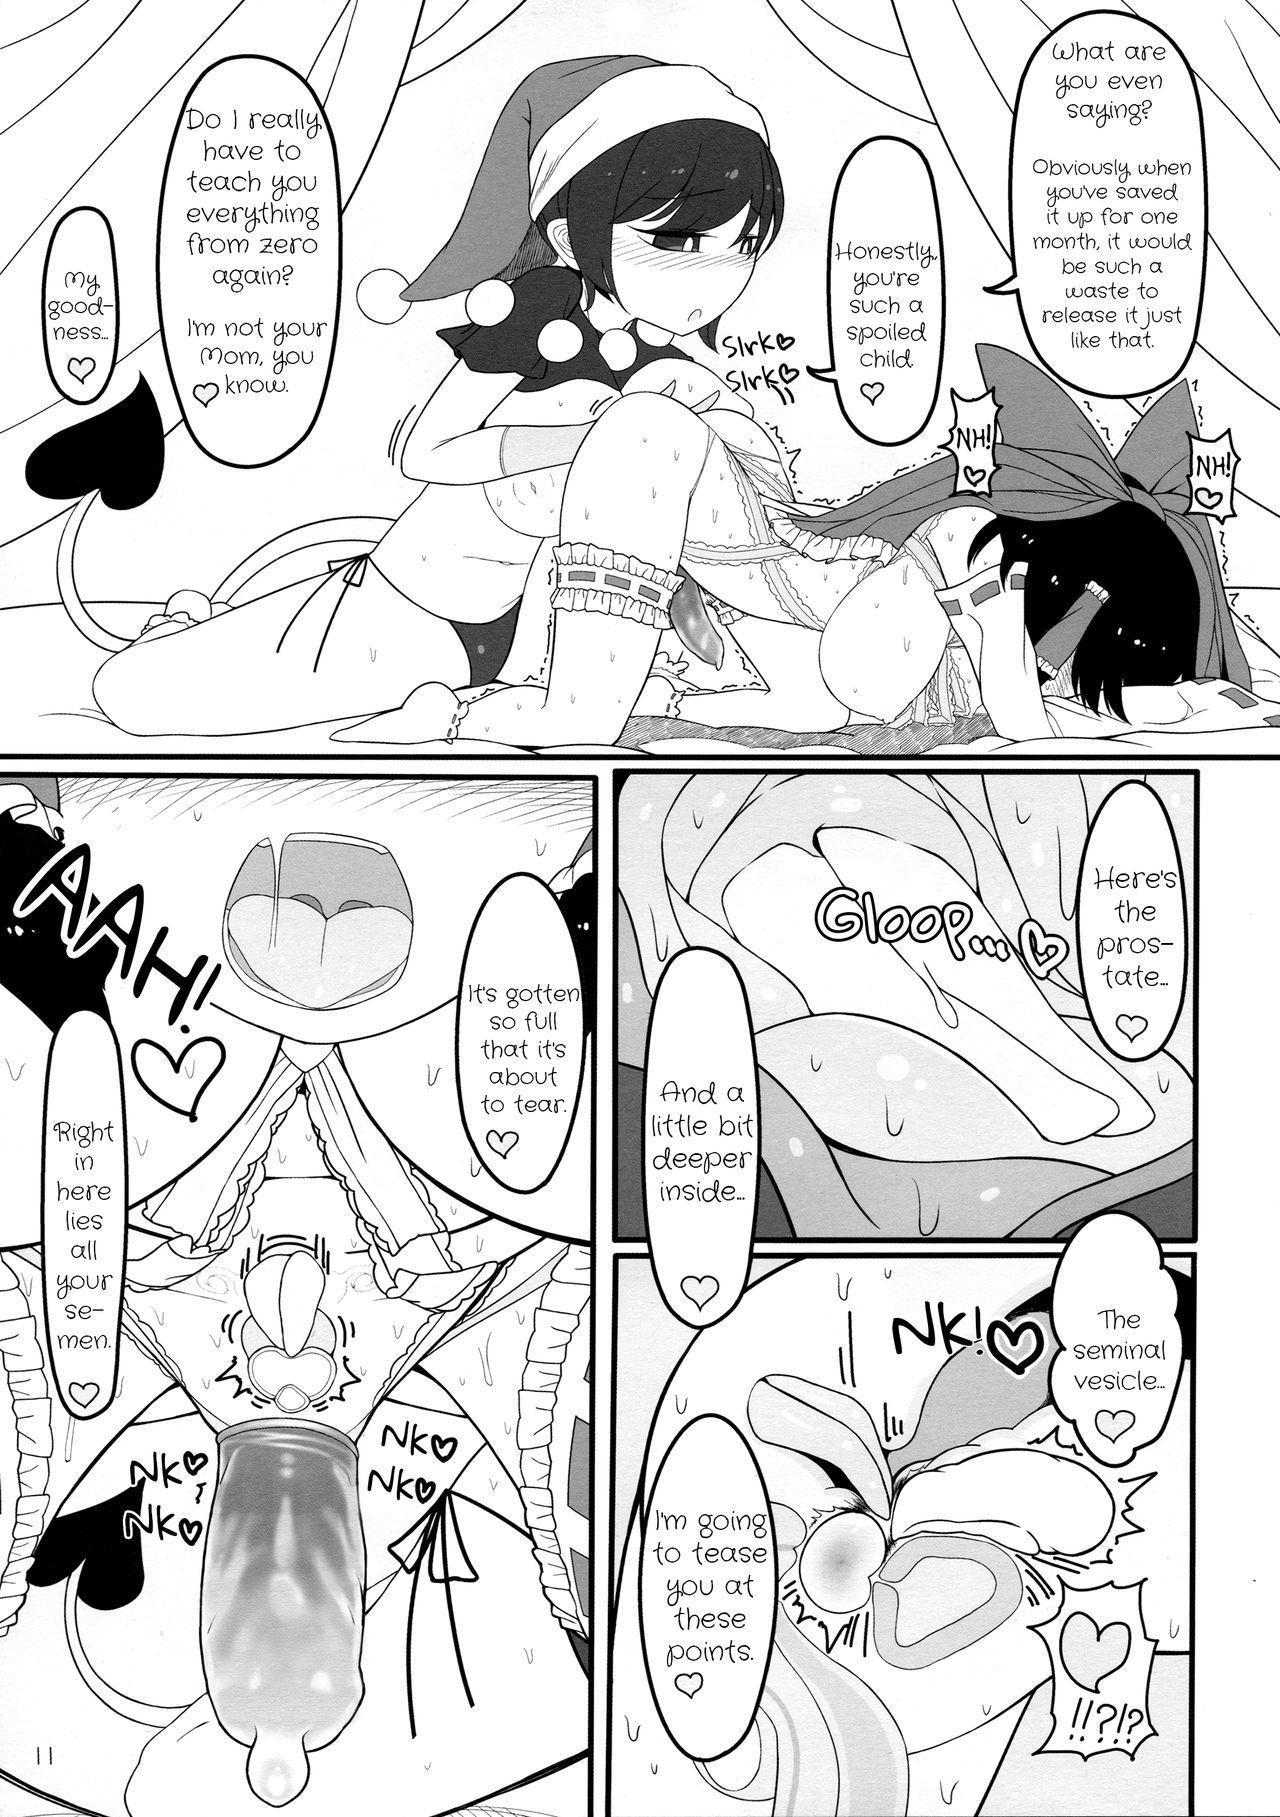 Pay Dreams dreams - Touhou project Cheating - Page 10